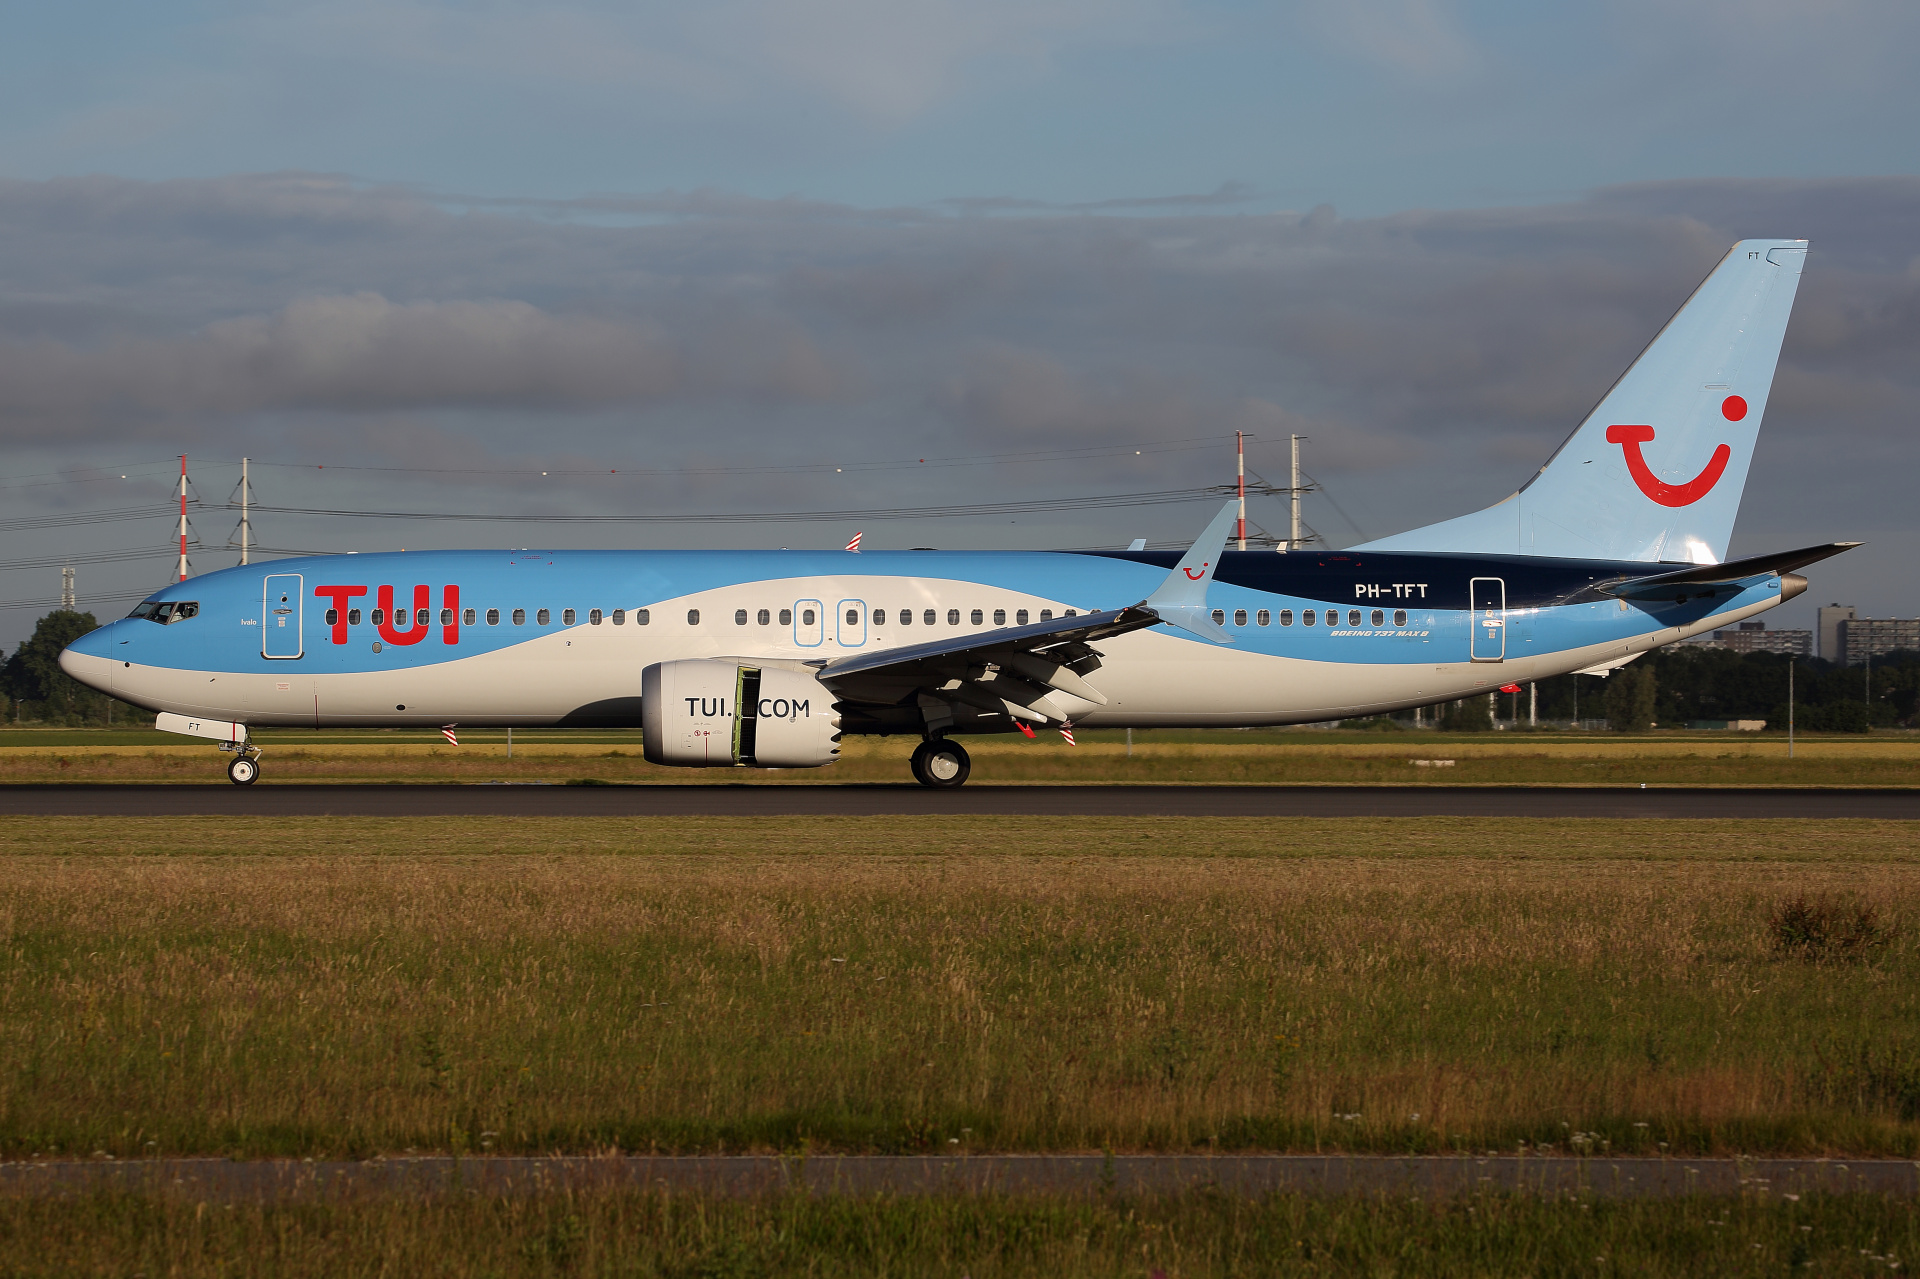 PH-TFT, TUI fly Netherlands (Aircraft » Schiphol Spotting » Boeing 737-8 MAX » TUI fly)